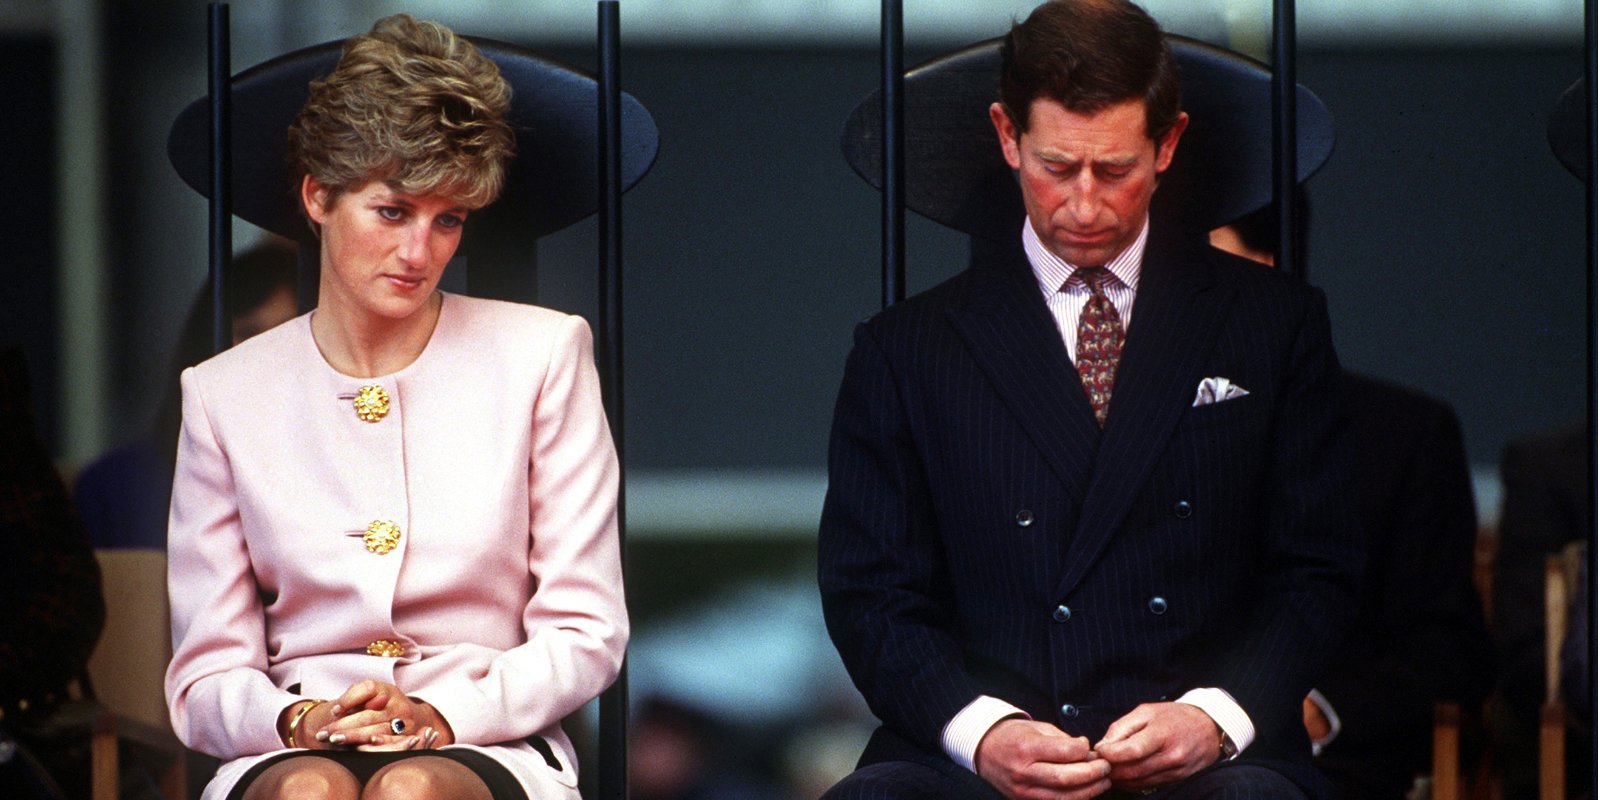 Princess Diana and then-Prince Charles photographed in 1991.